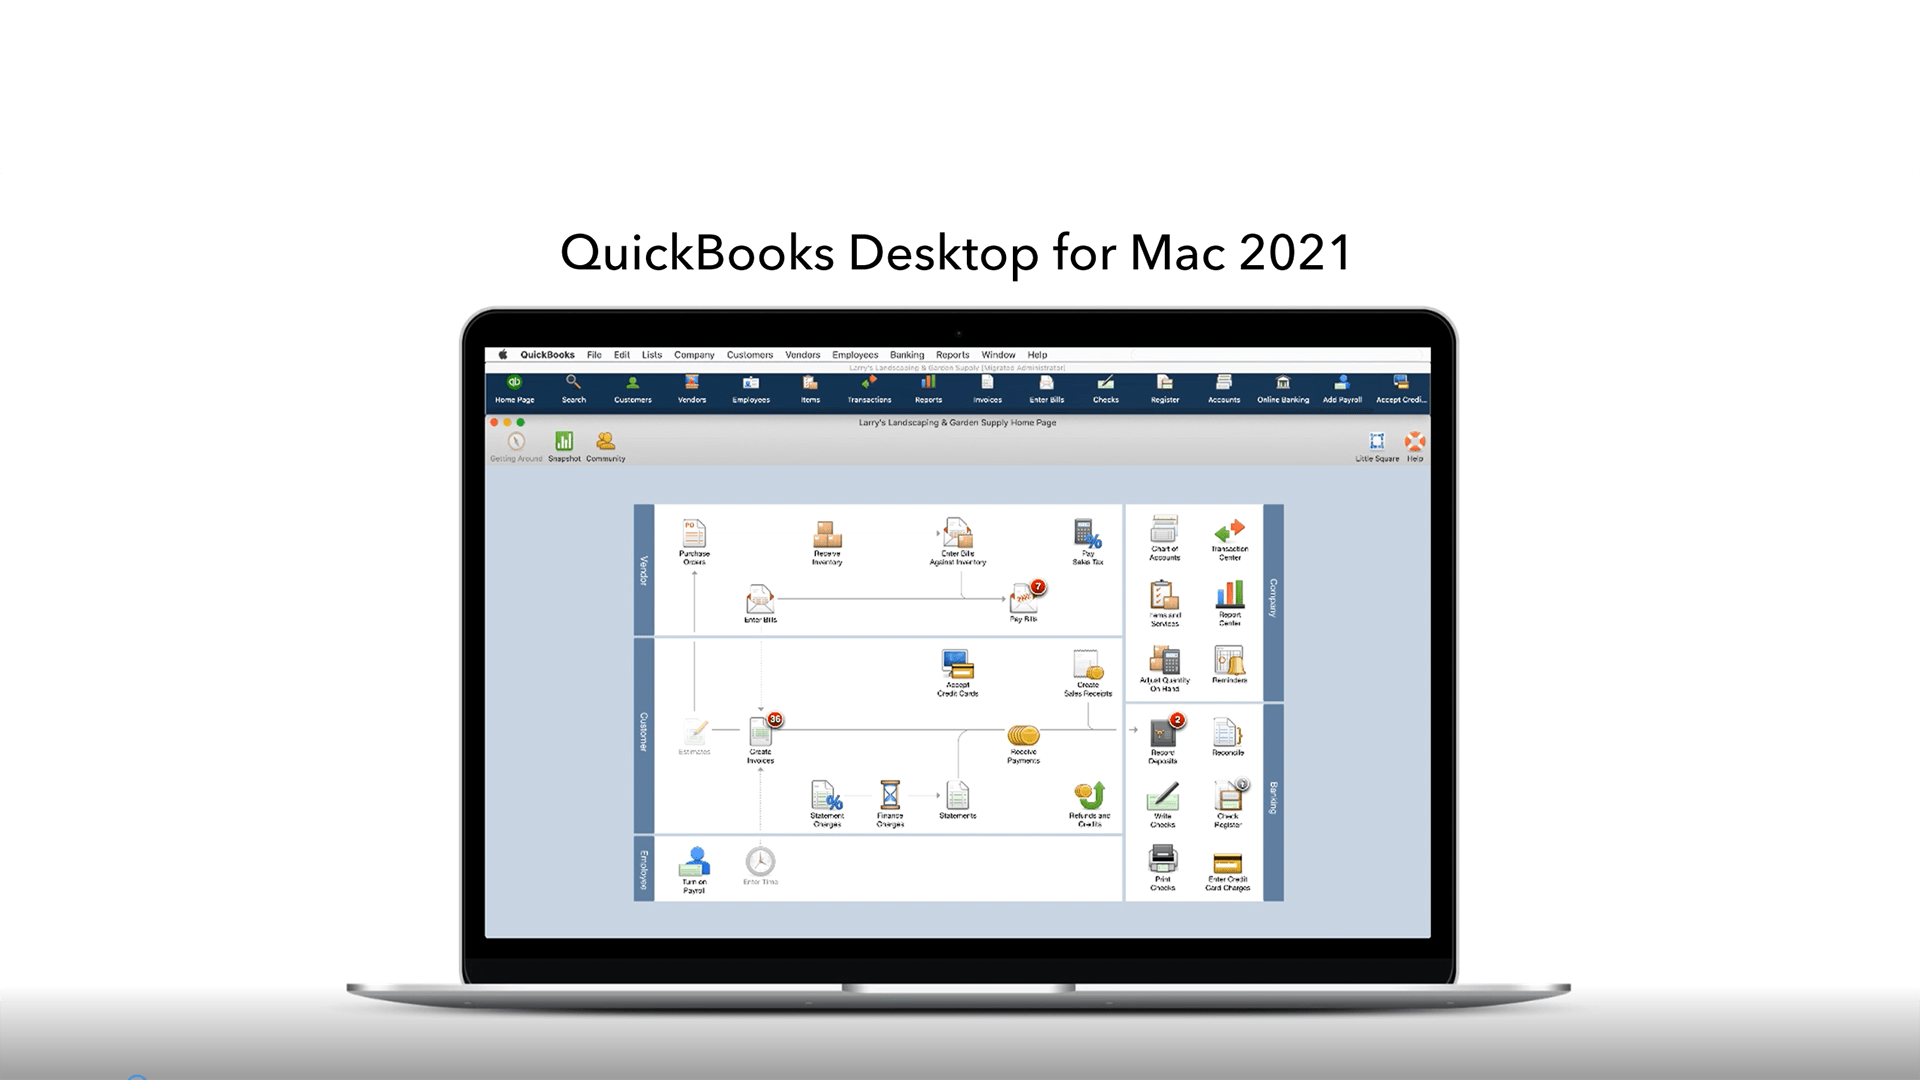 quickbooks pro for mac support